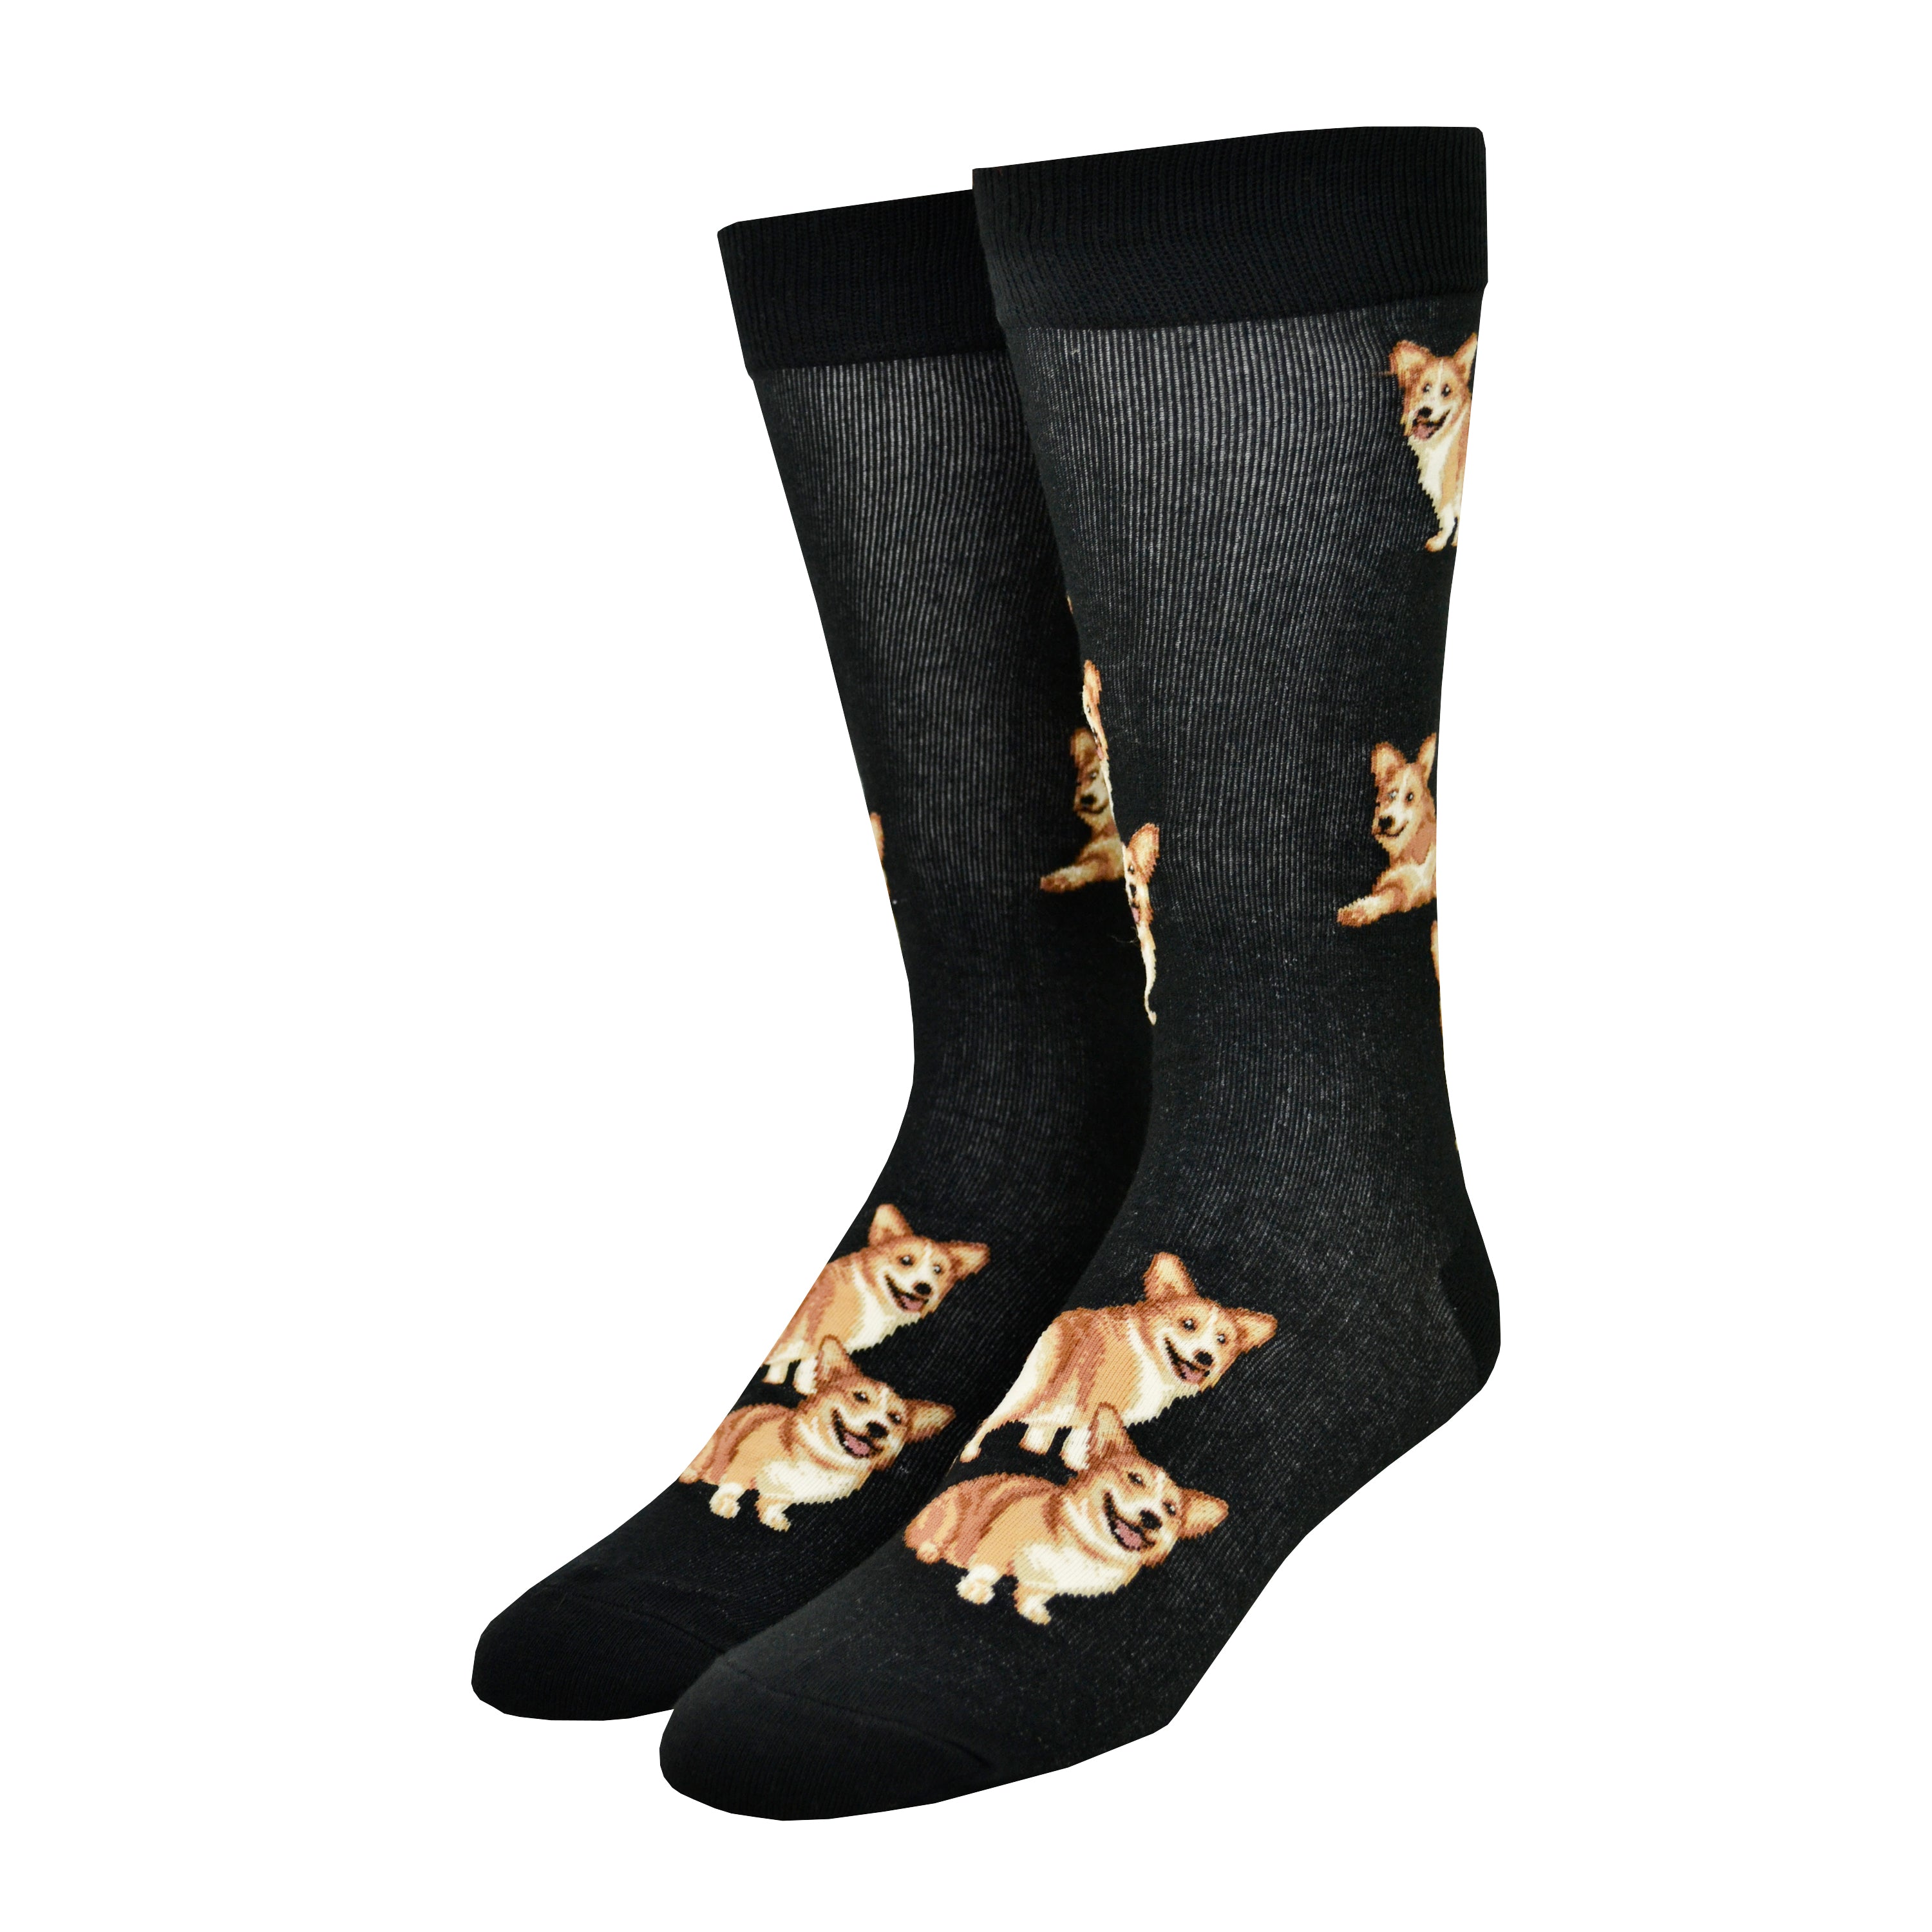 Shown on a leg form, these black cotton men's fun novelty crew socks by the brand Mod Socks feature adorable Corgi dogs smiling, sitting down and some standing up showing their cute butts.